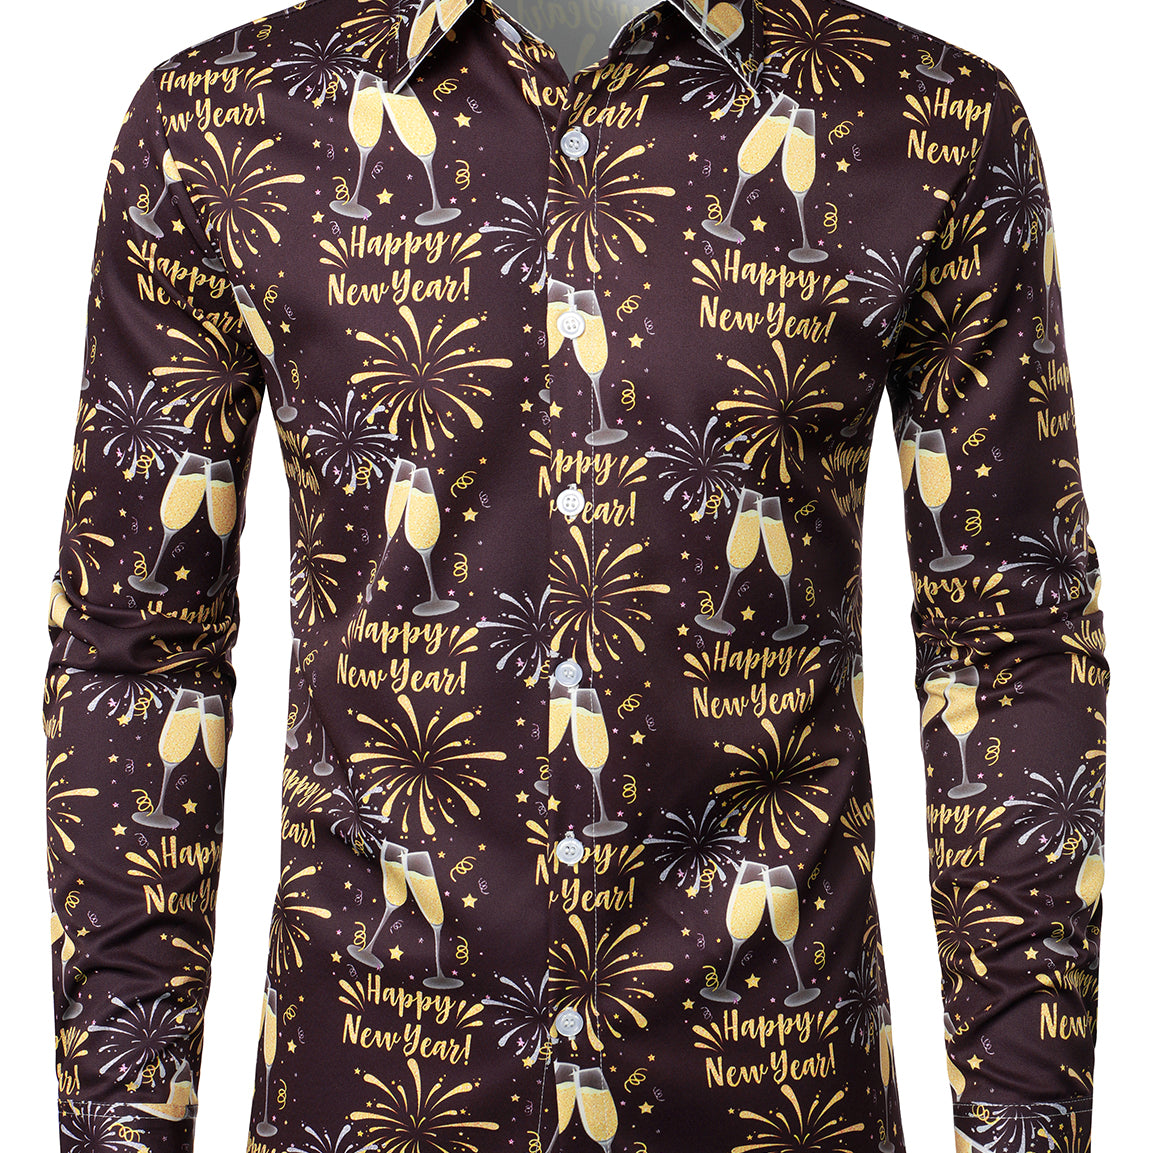 Men's Fireworks Holiday Happy New Year Eve Party Button Up Long Sleeve Shirt